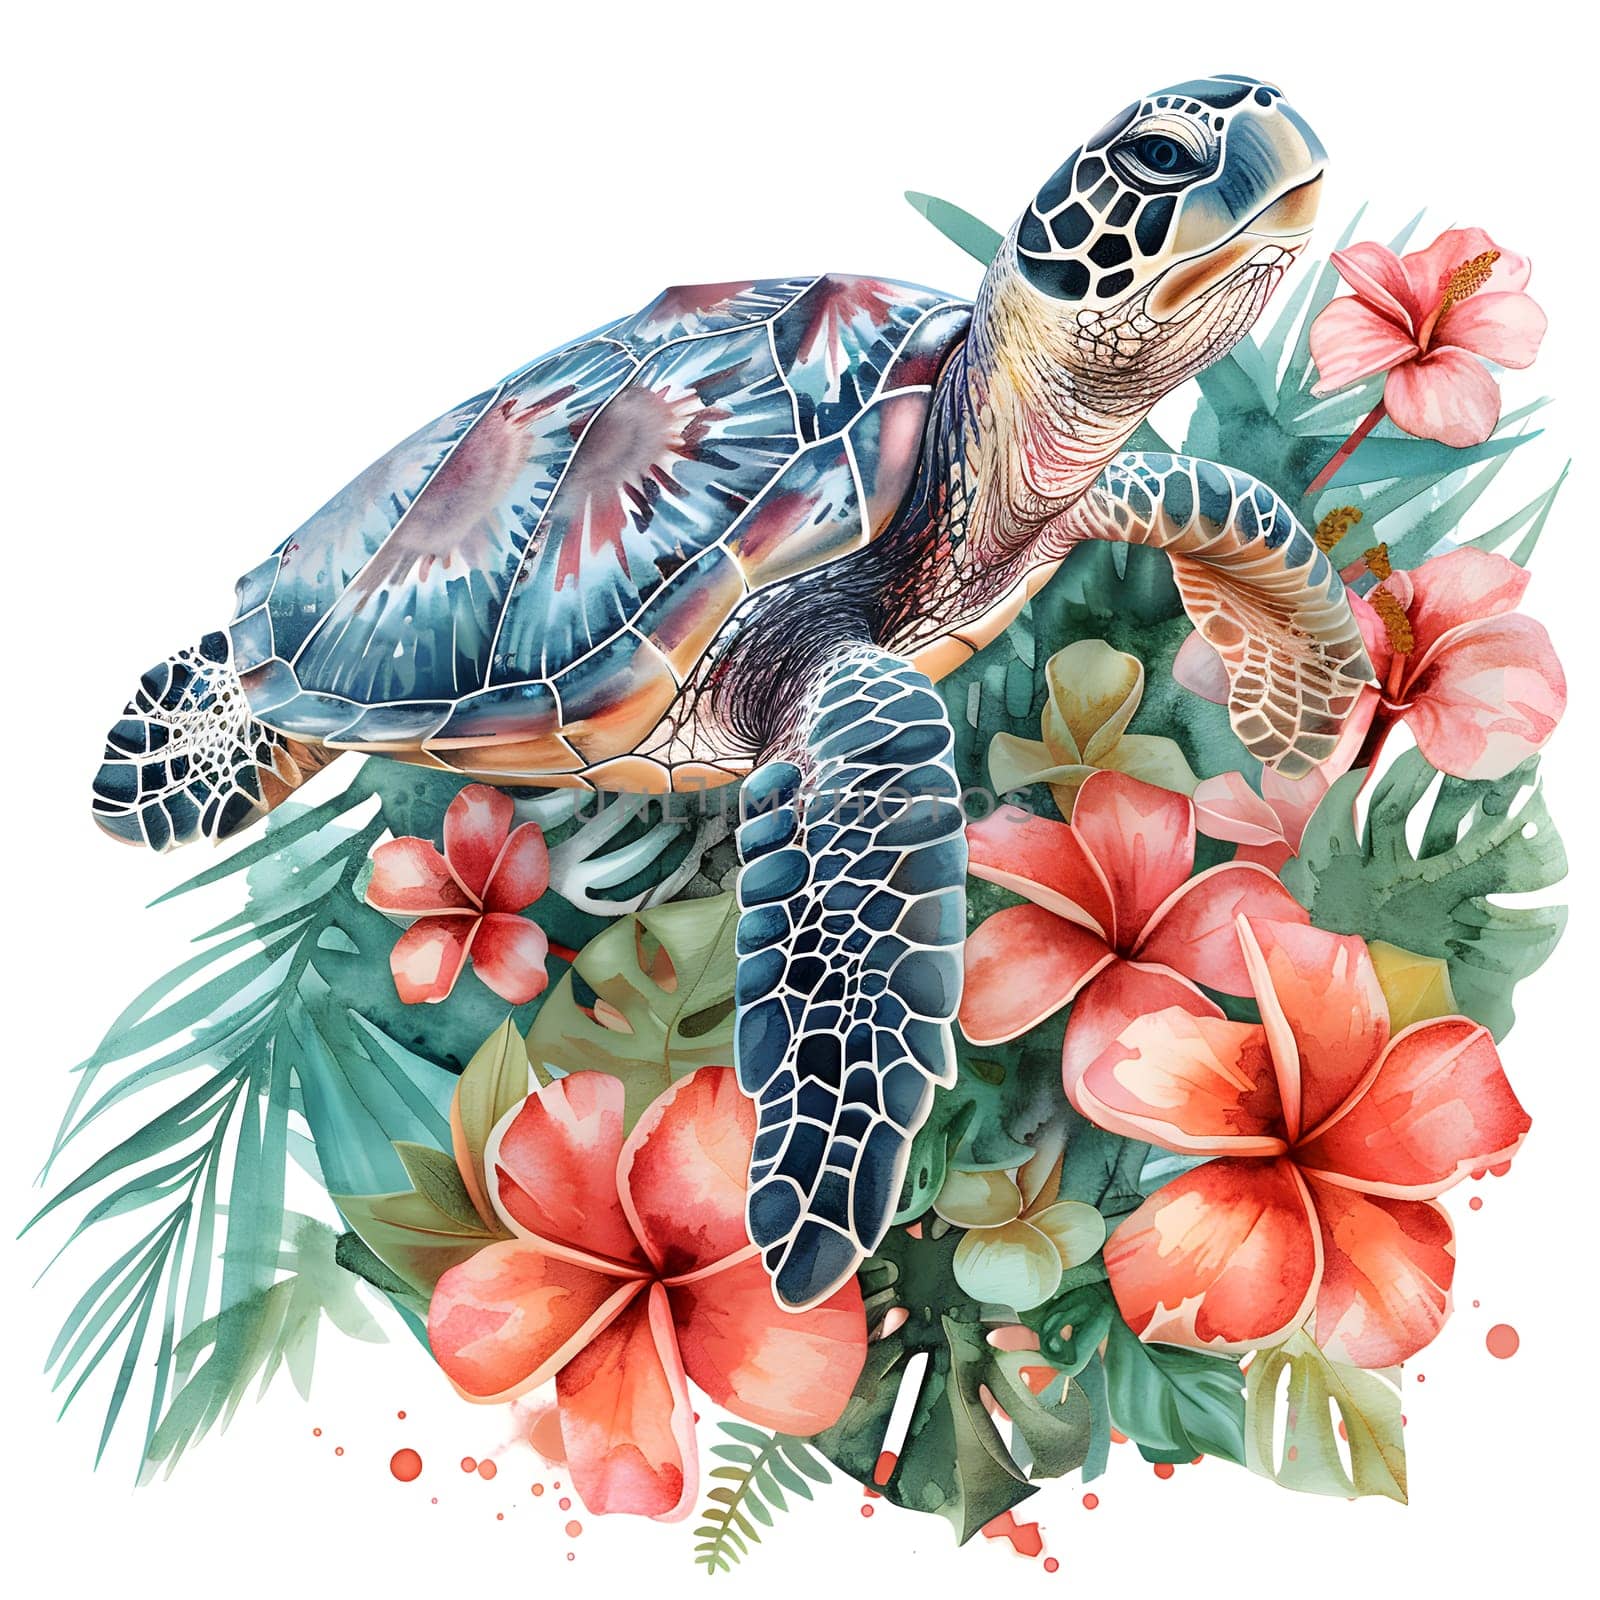 A sea turtle amidst tropical flowers and leaves, a creative arts illustration by Nadtochiy